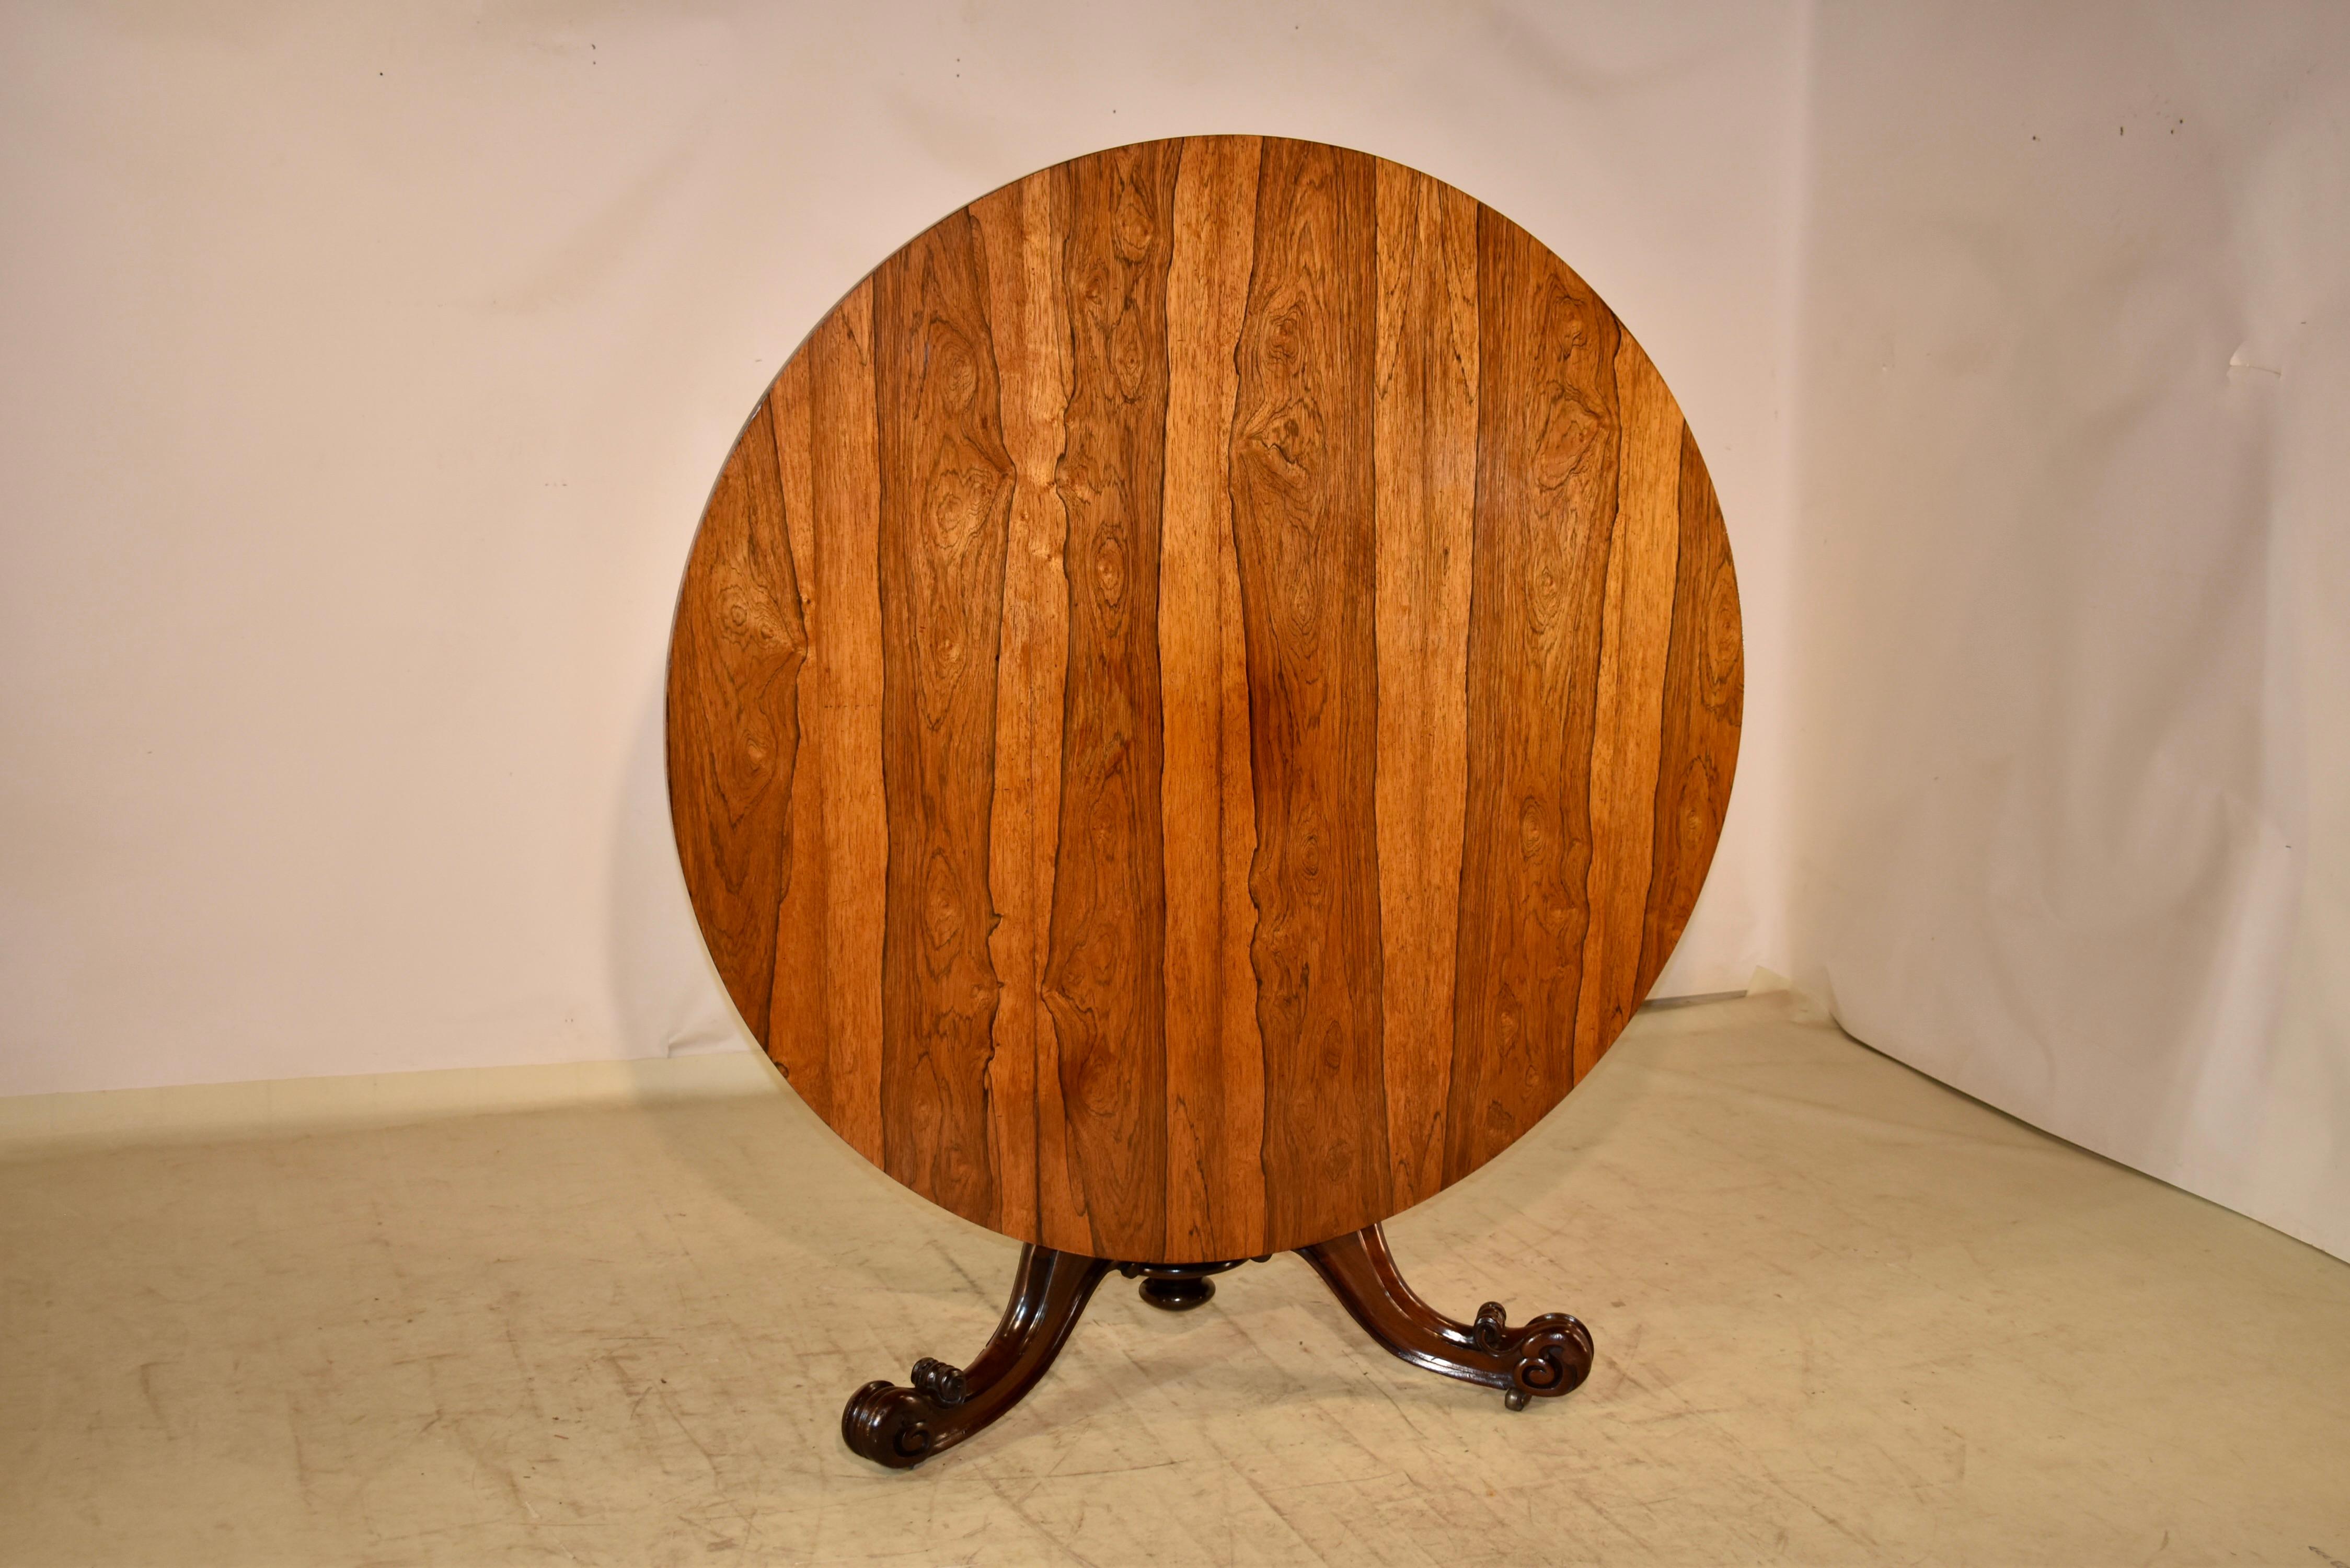 19th century rosewood tilt top table from England.  The top is made from the most beautifully grained rosewood we have ever seen.  The color is so vibrant, it almost looks alive!  The top has a simple apron and is supported on a graduated tapered